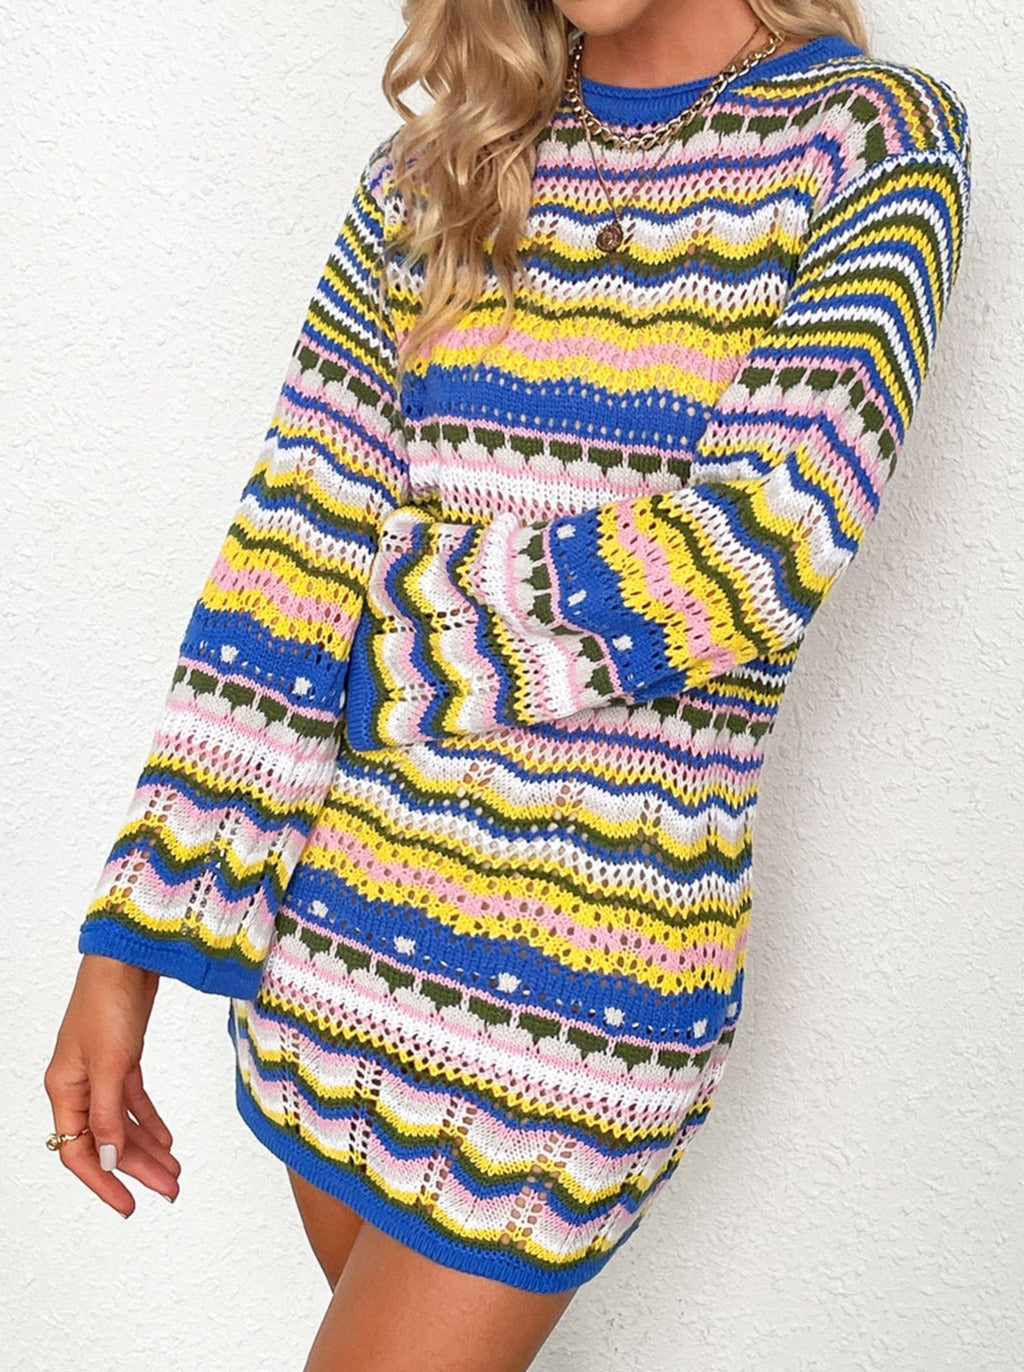 NTG Fad Clothes Autumn and winter rainbow striped pullover mid-length sweater